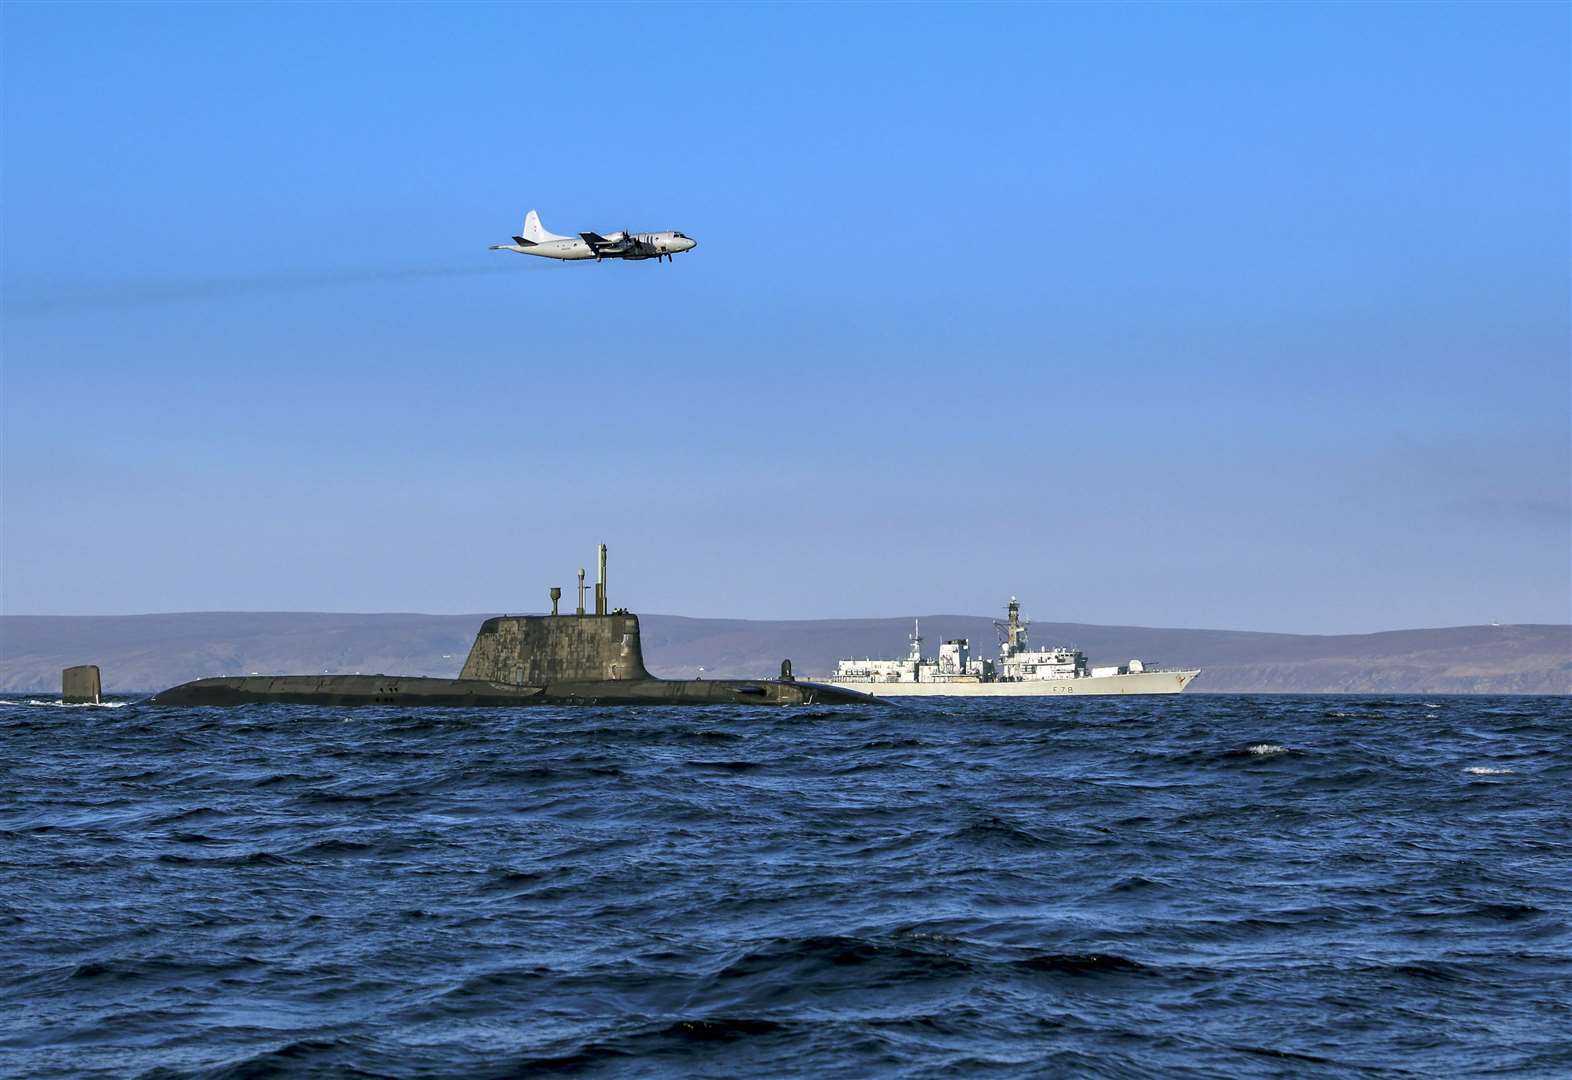 An Astute class nuclear submarine with a Type 23 frigate and a German Navy P3 maritime patrol aircraft.